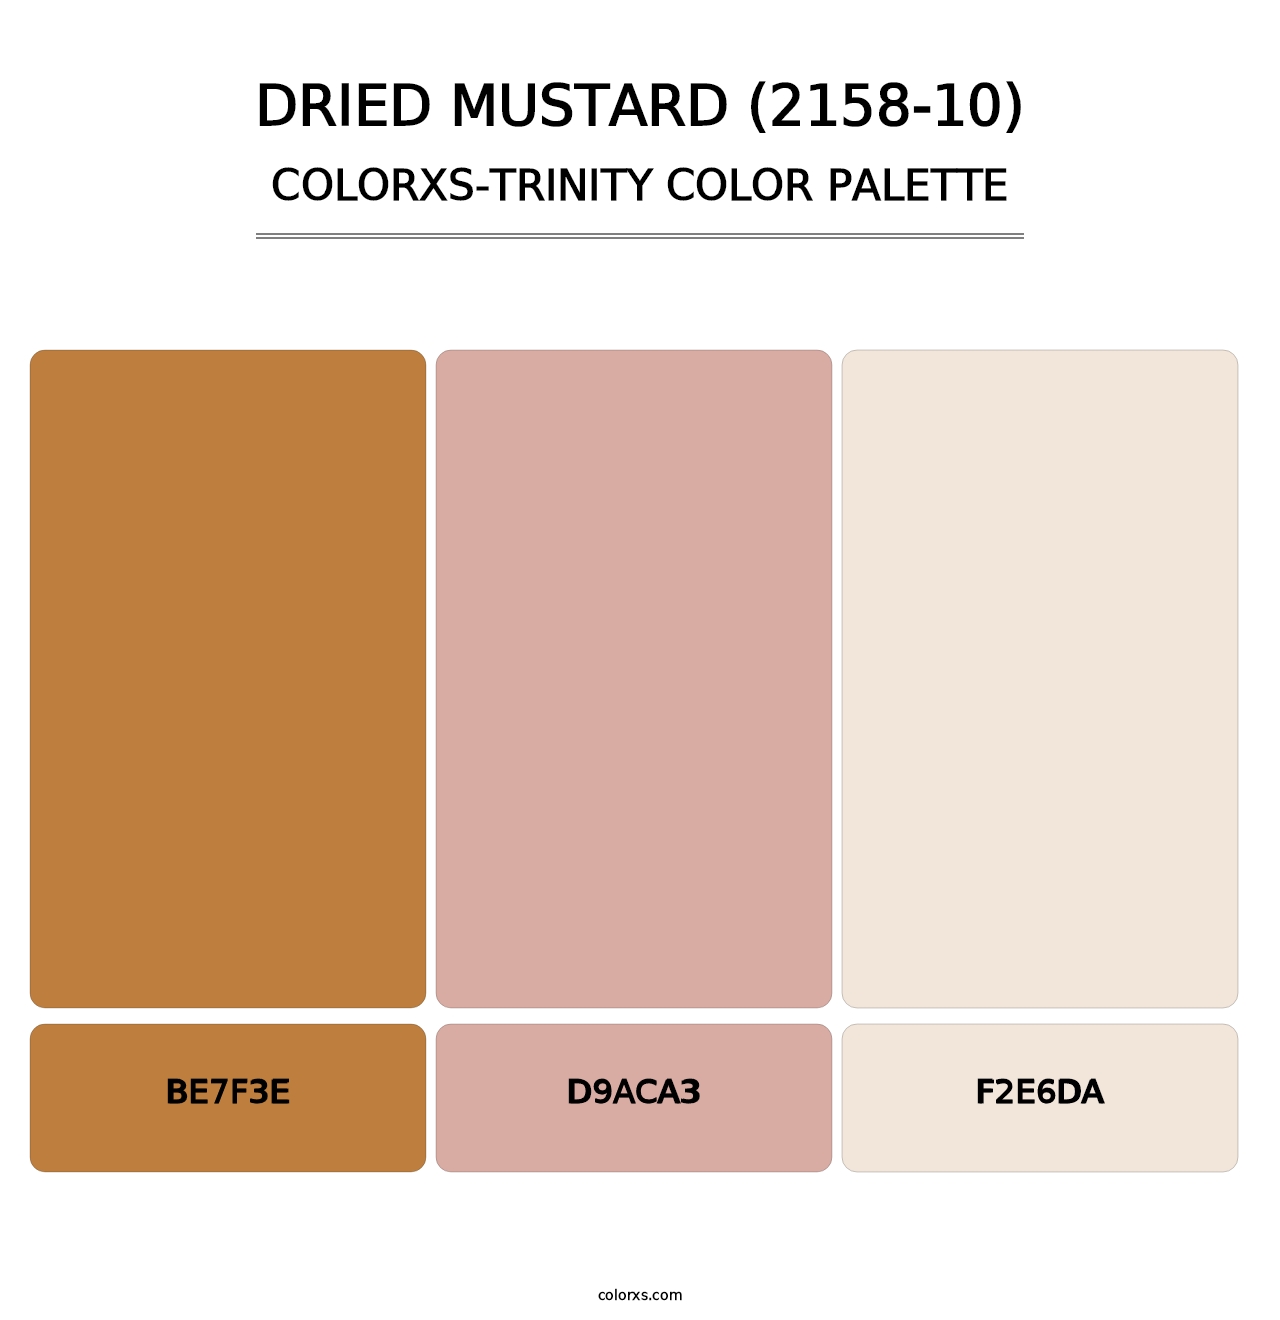 Dried Mustard (2158-10) - Colorxs Trinity Palette